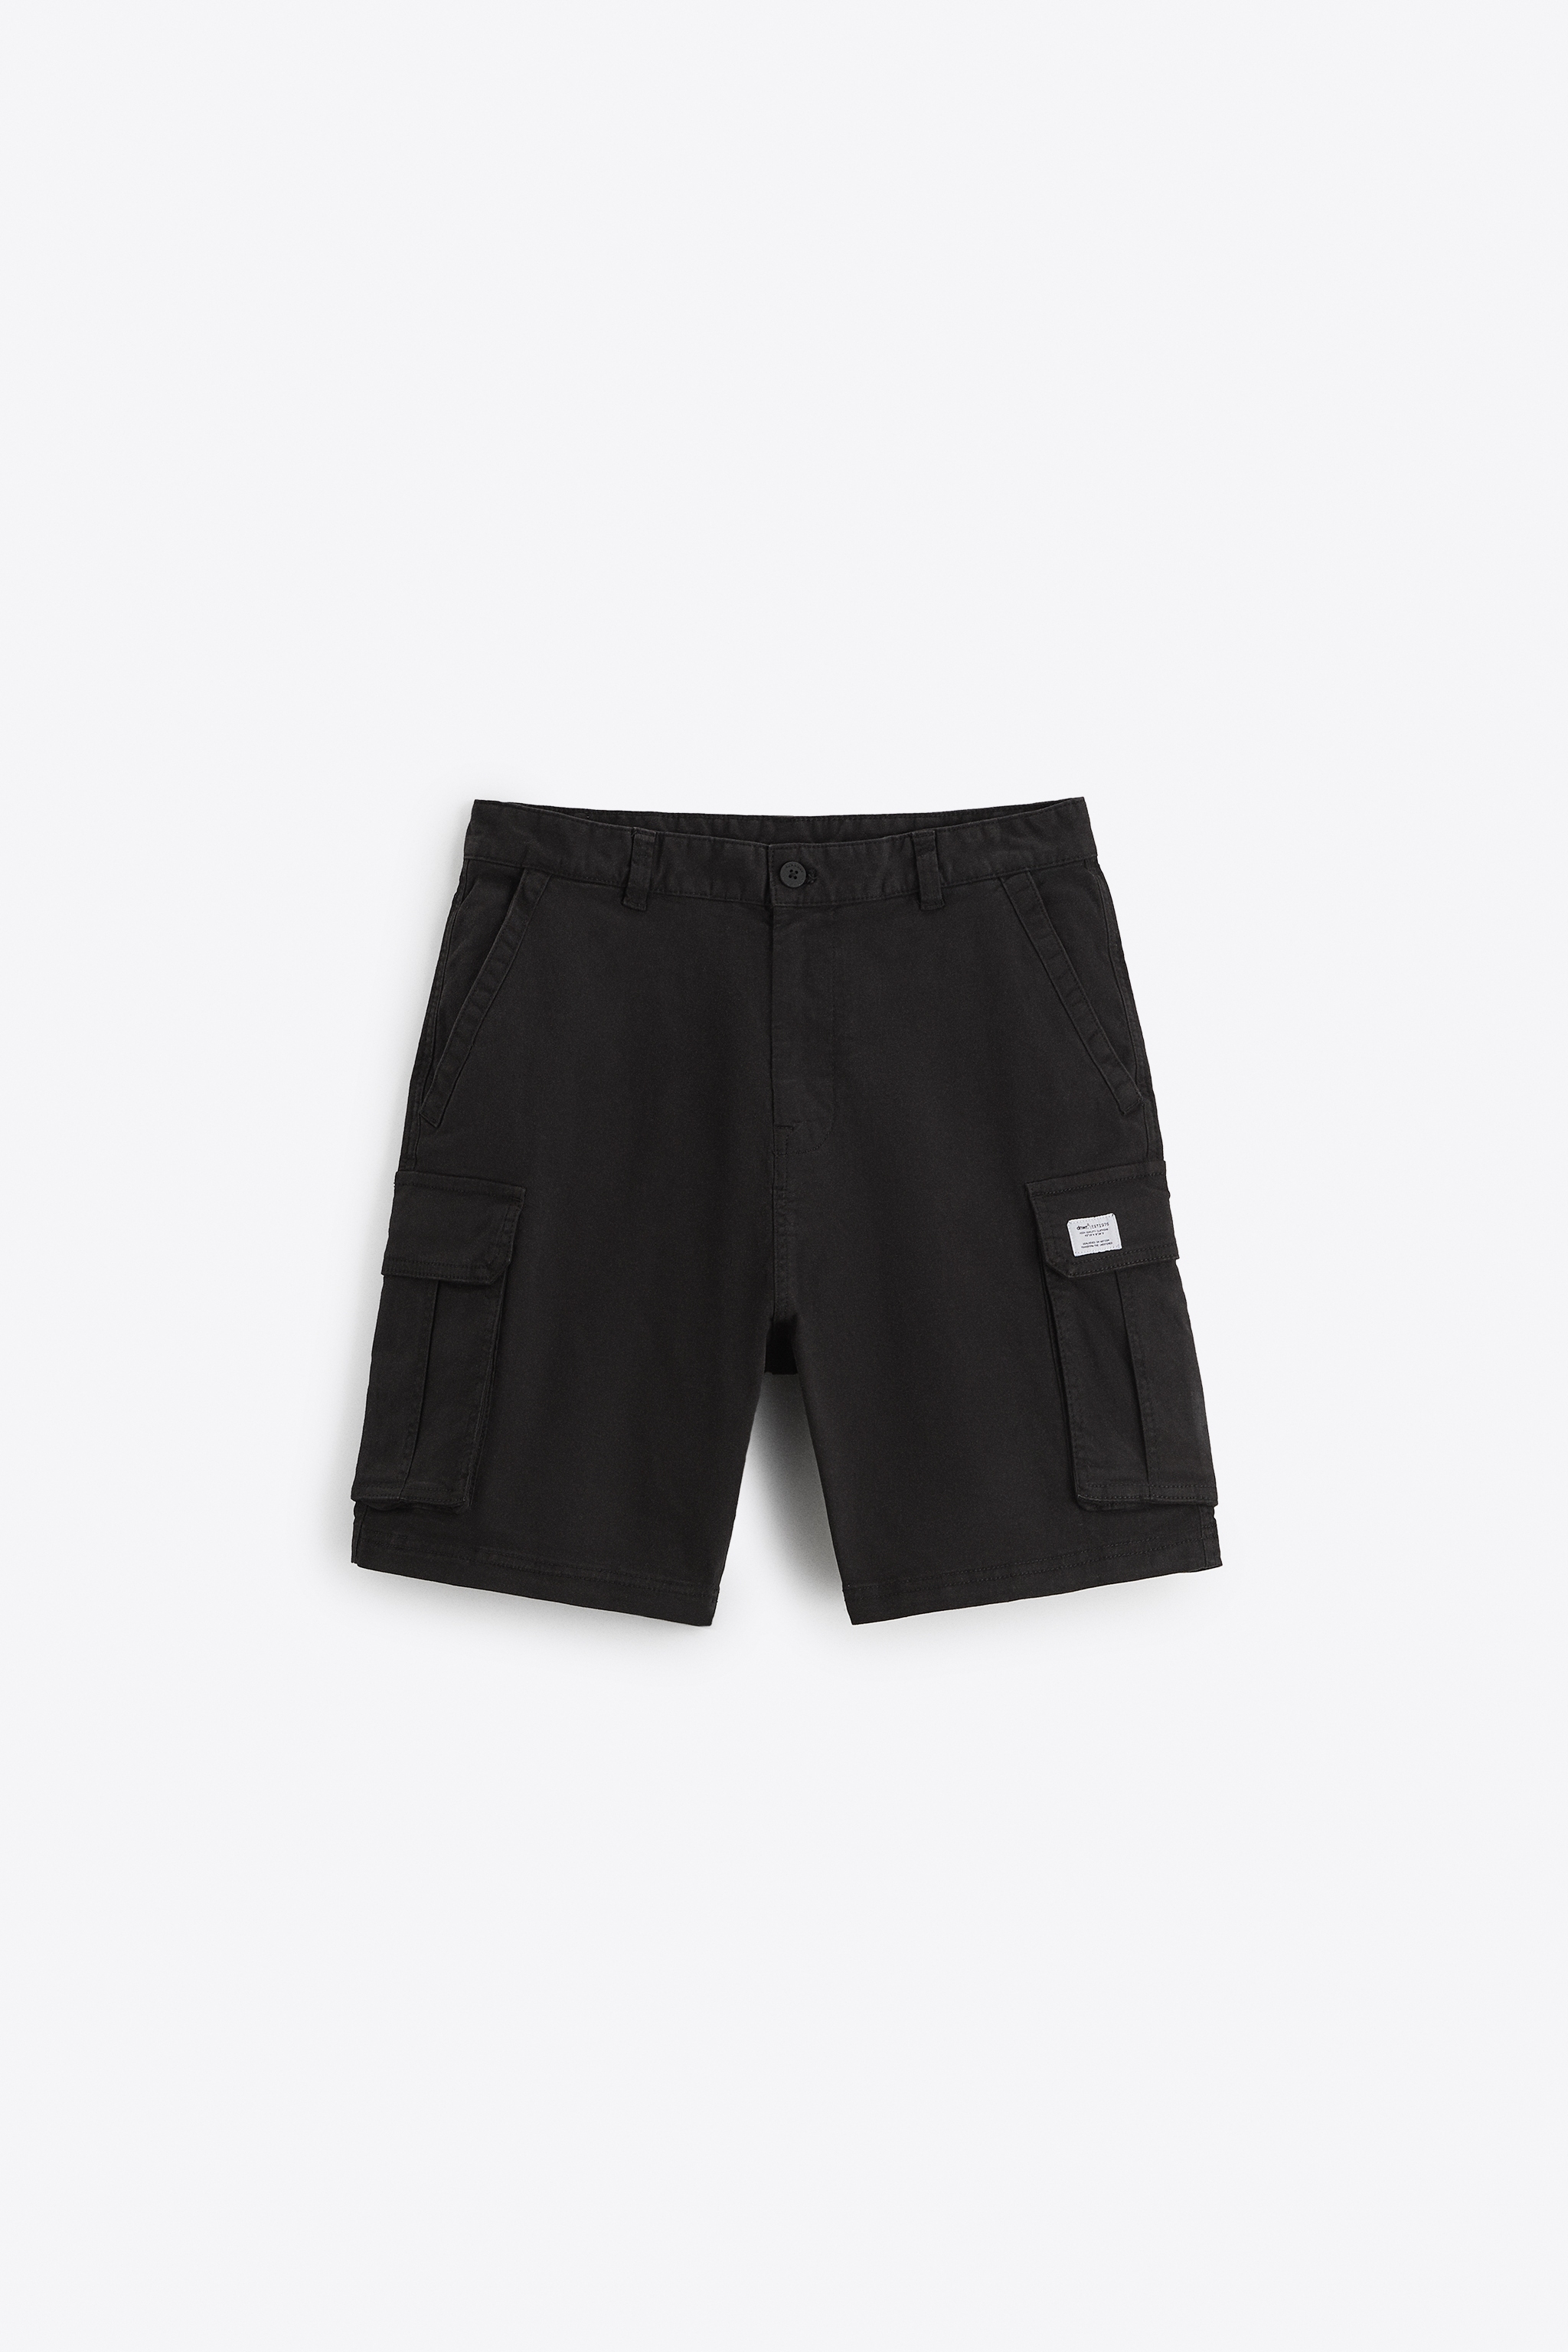 Elastic waistband shorts. Front pockets and back Flap pockets. patch at legs. zip button closure.